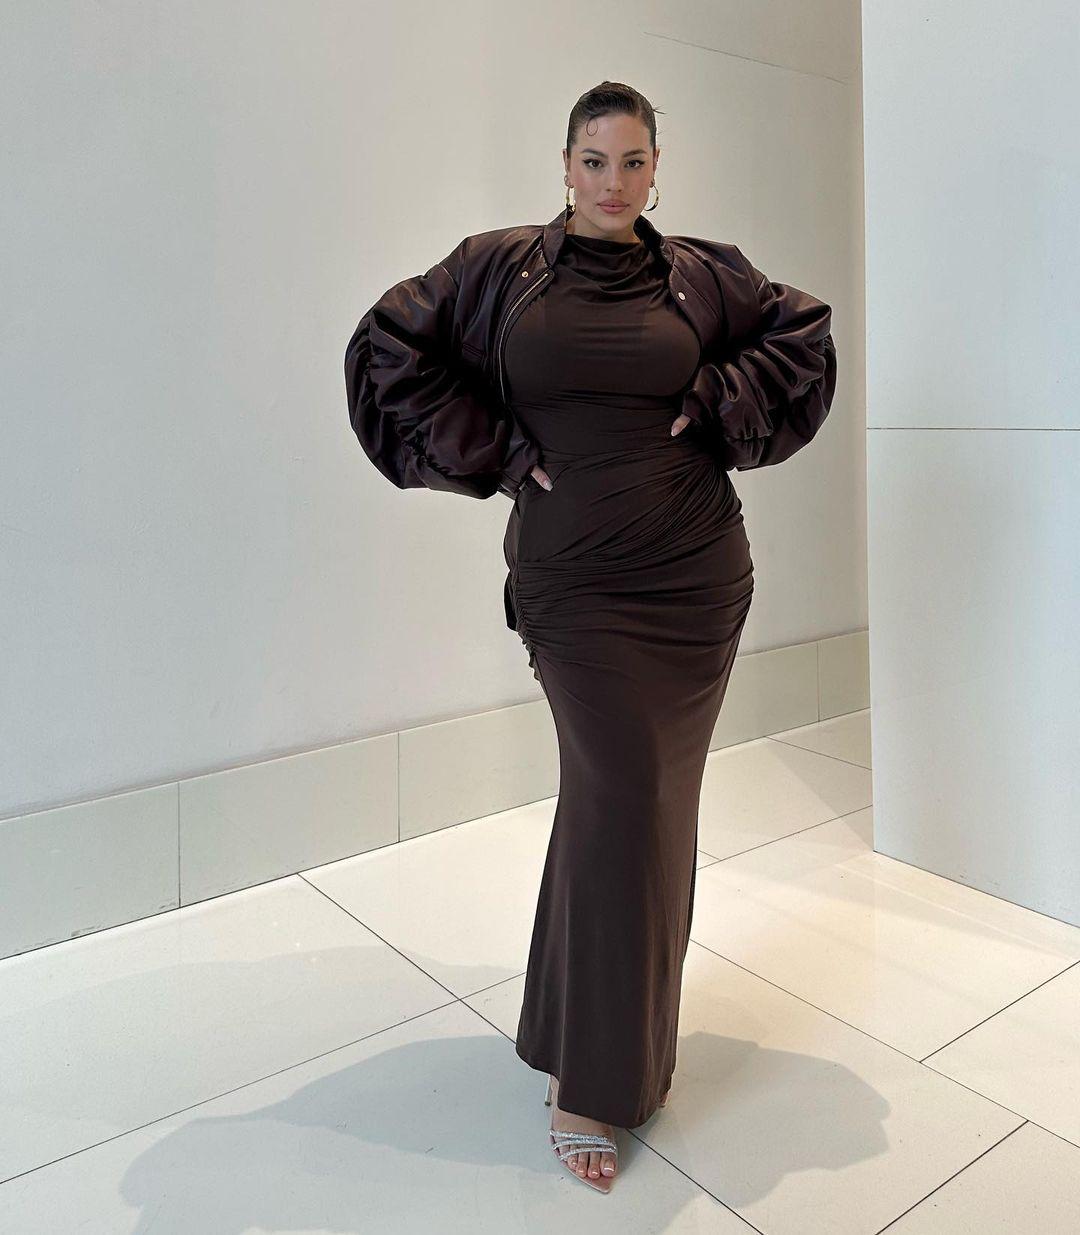 Plus-size model Ashley Graham wows in lingerie at New York Fashion Week